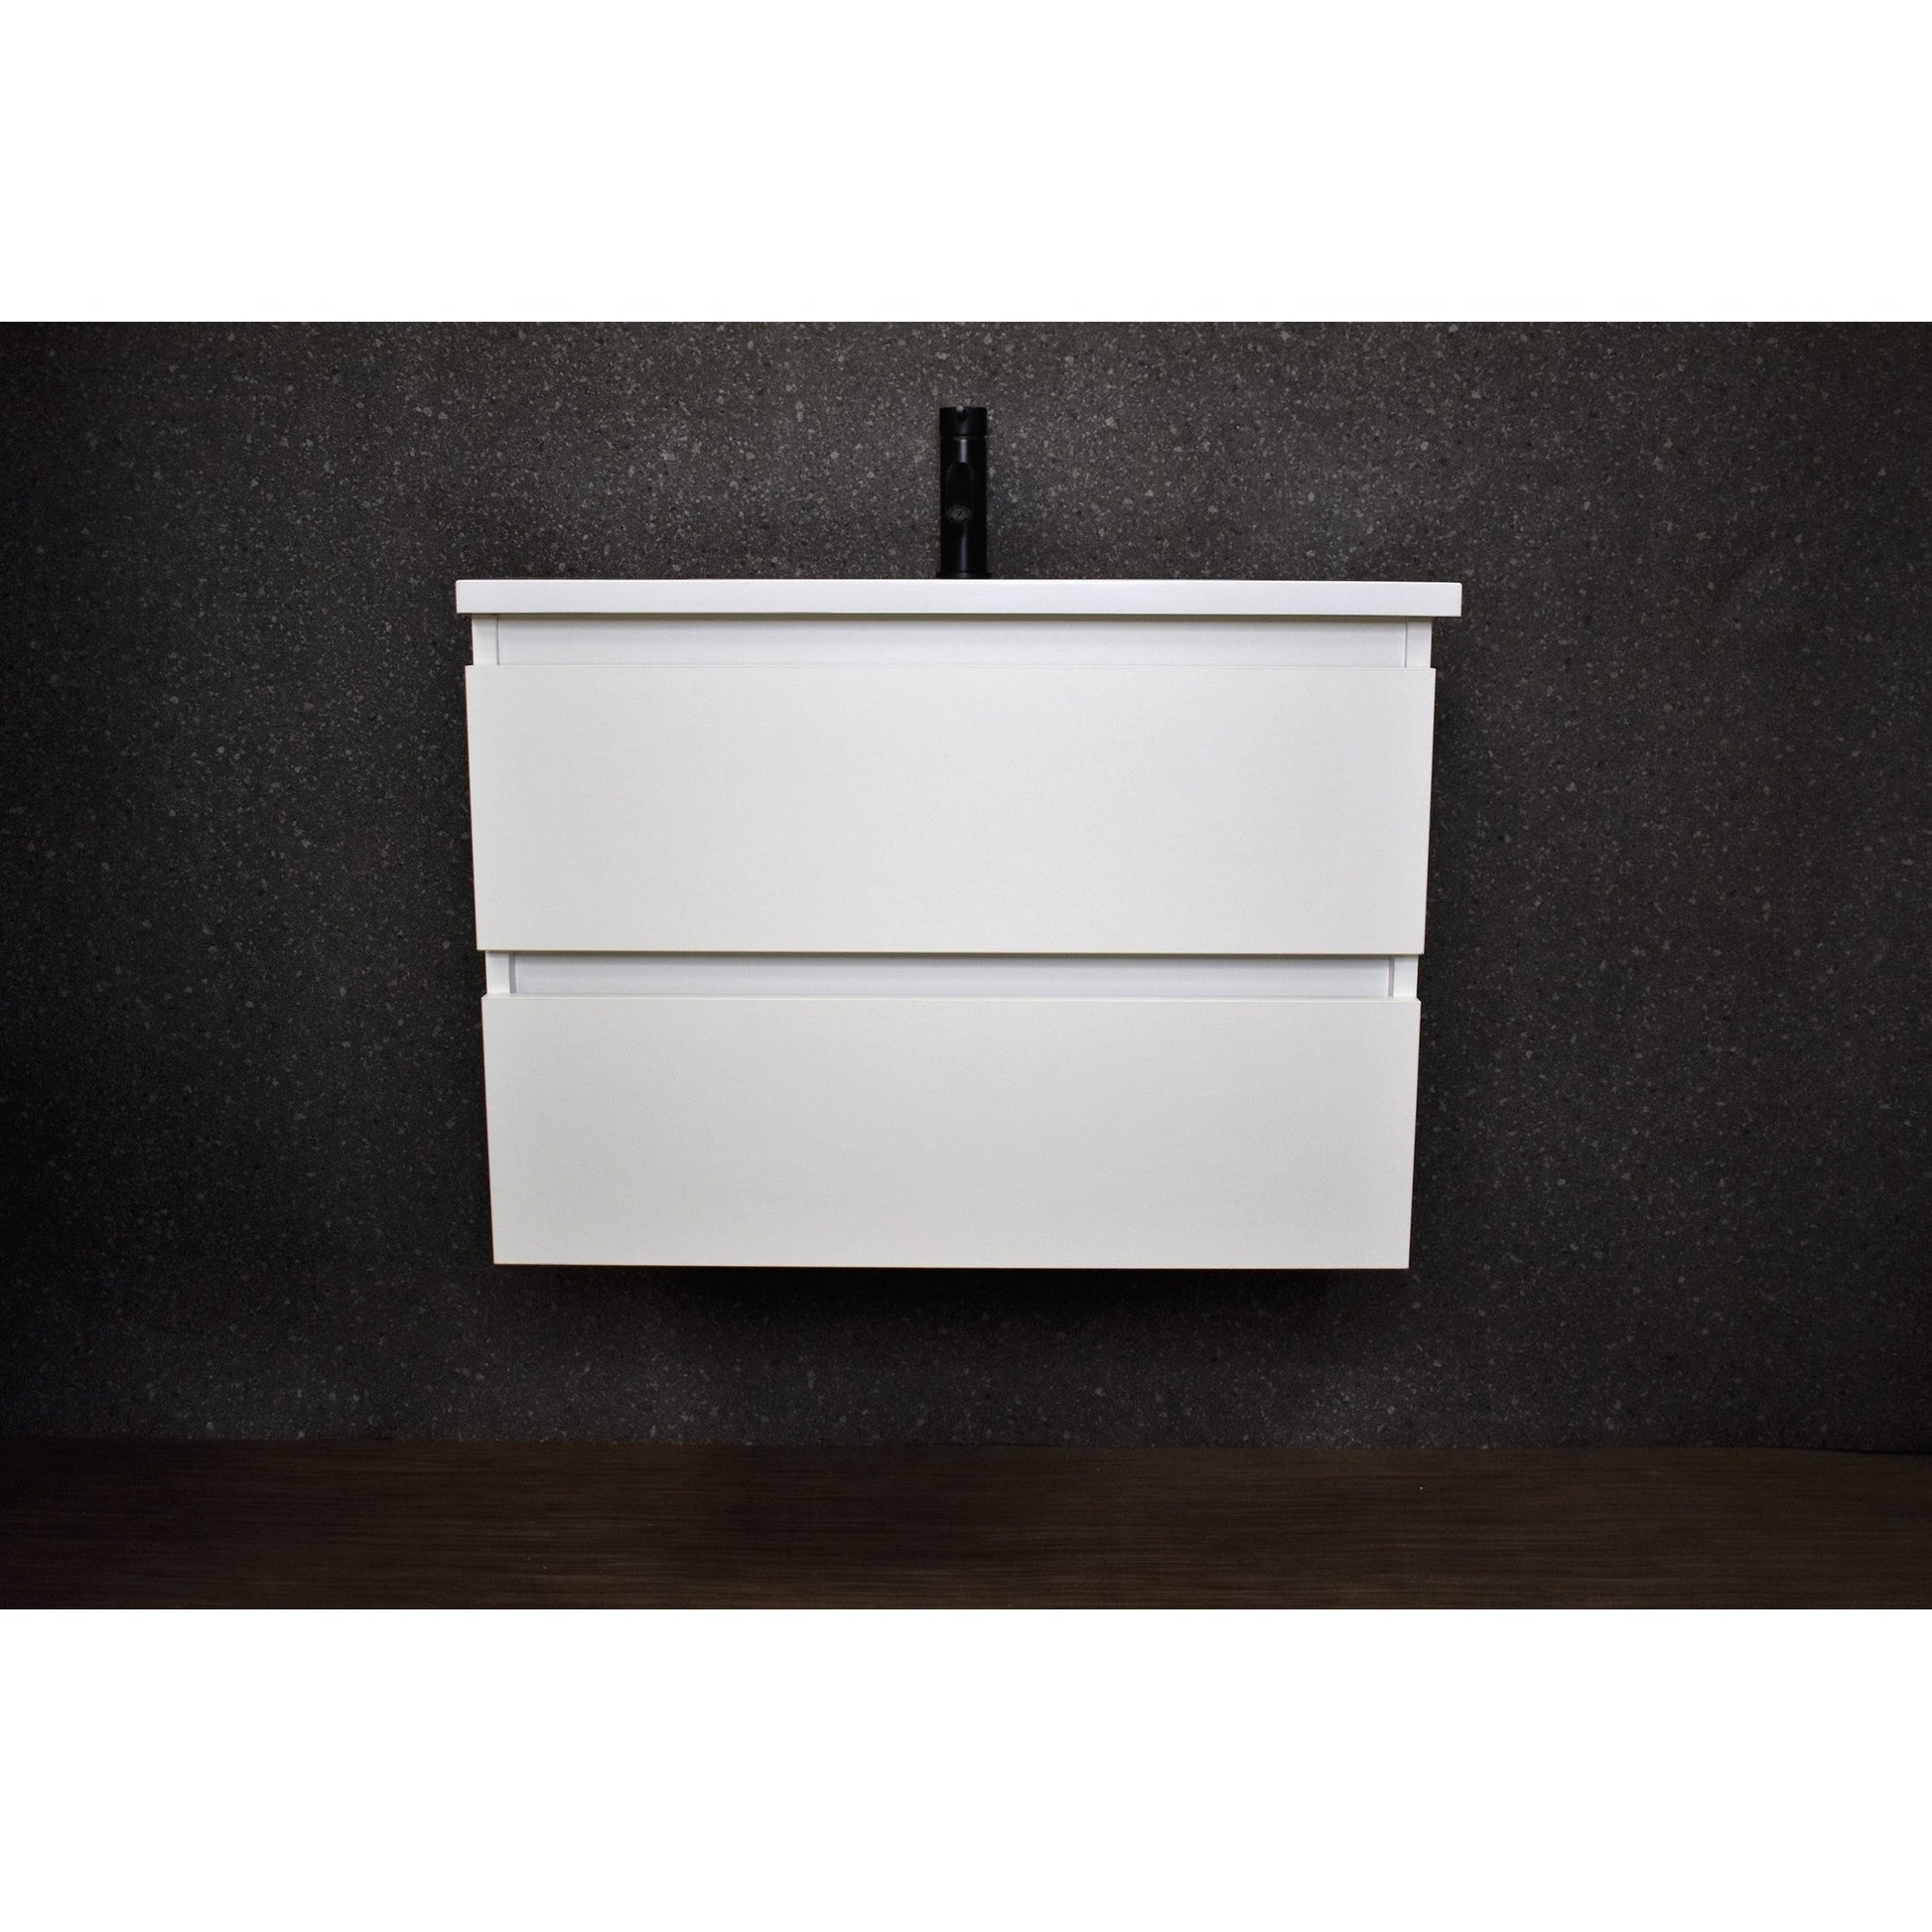 Volpa USA Salt 24" x 20" Glossy White Wall-Mounted Floating Bathroom Vanity With Drawers, Acrylic Top and Integrated Acrylic Sink